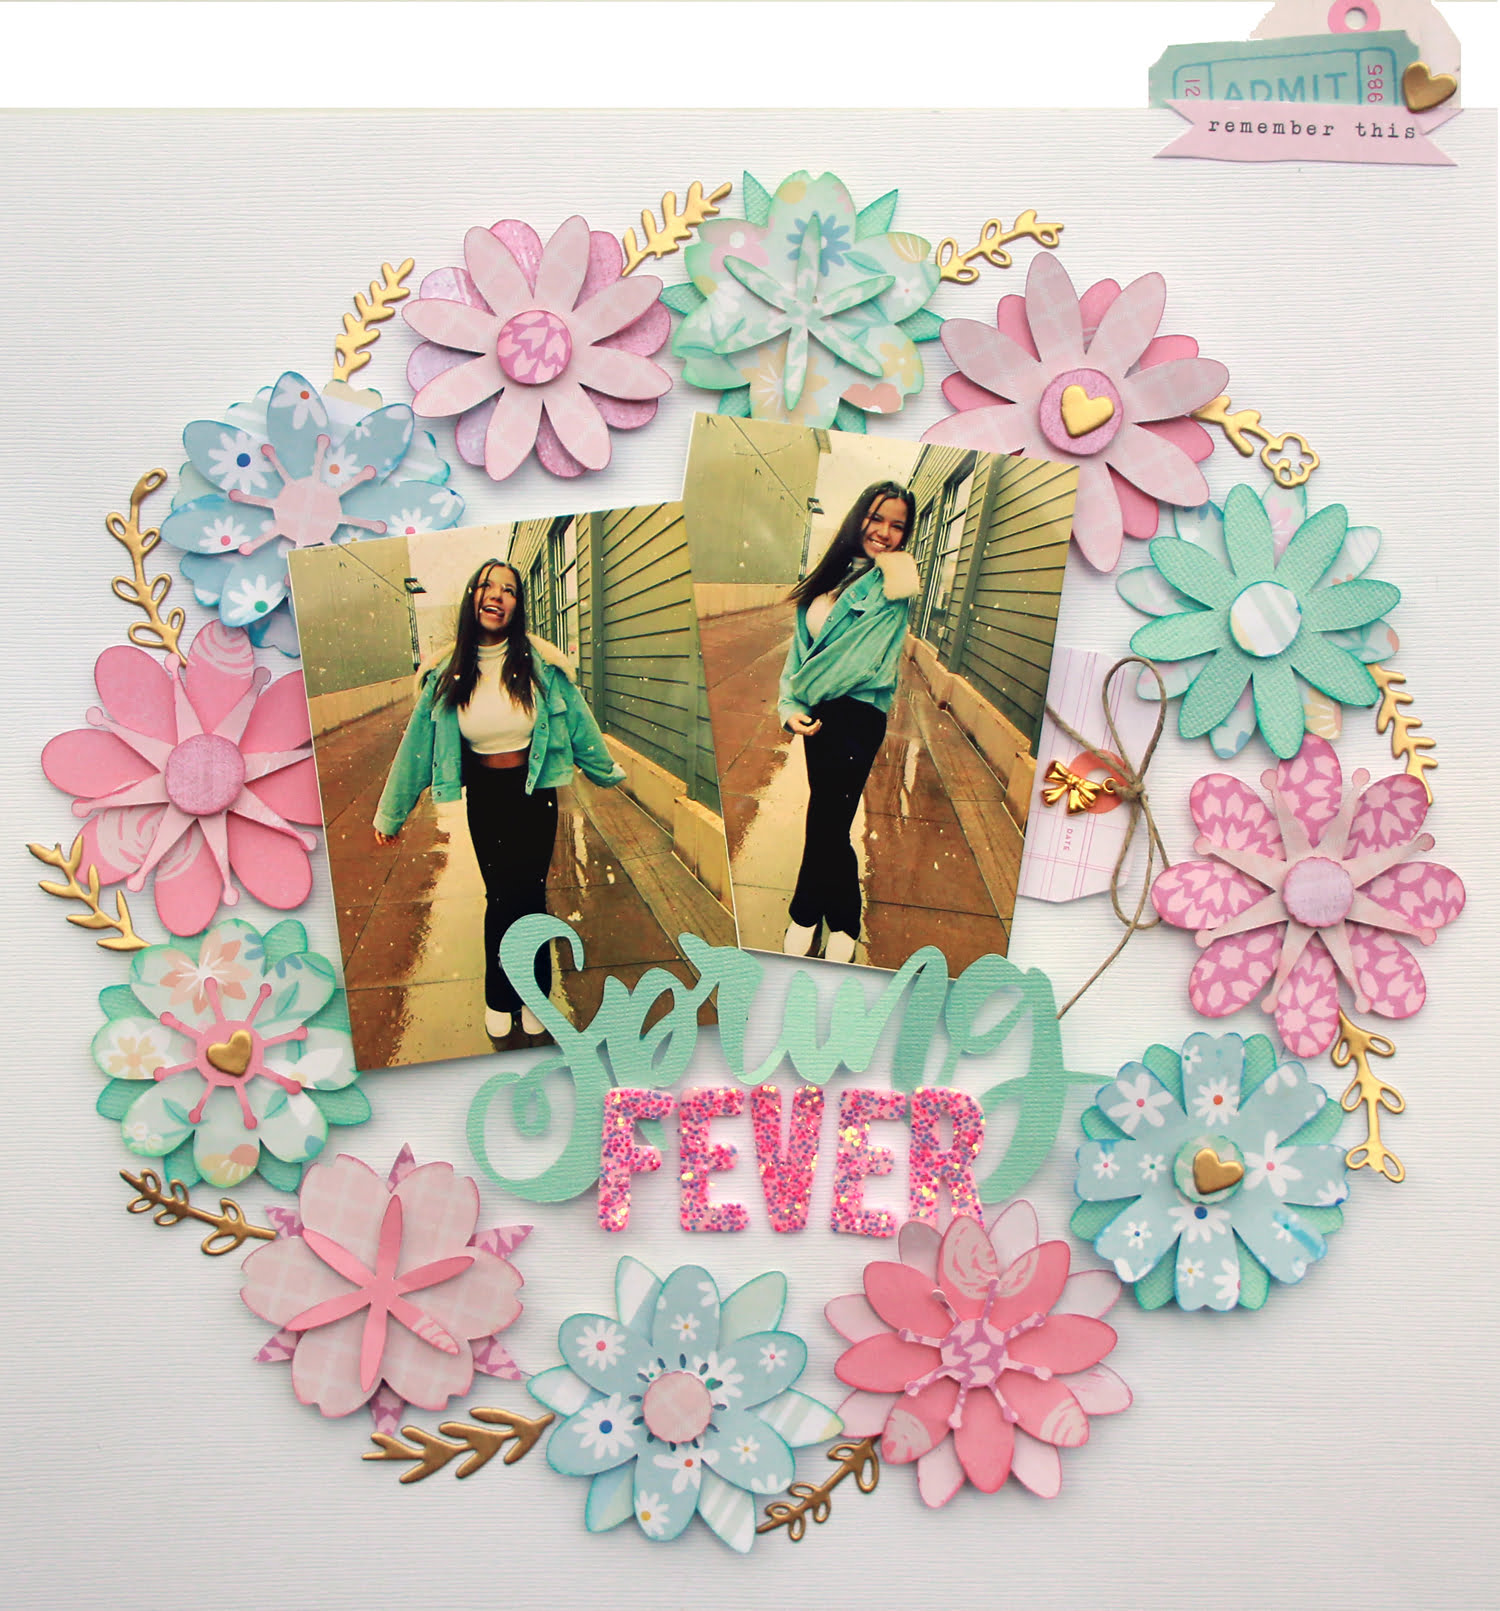 The 25+ Most Popular Scrapbooking Kits This Year! - the slow bloom.